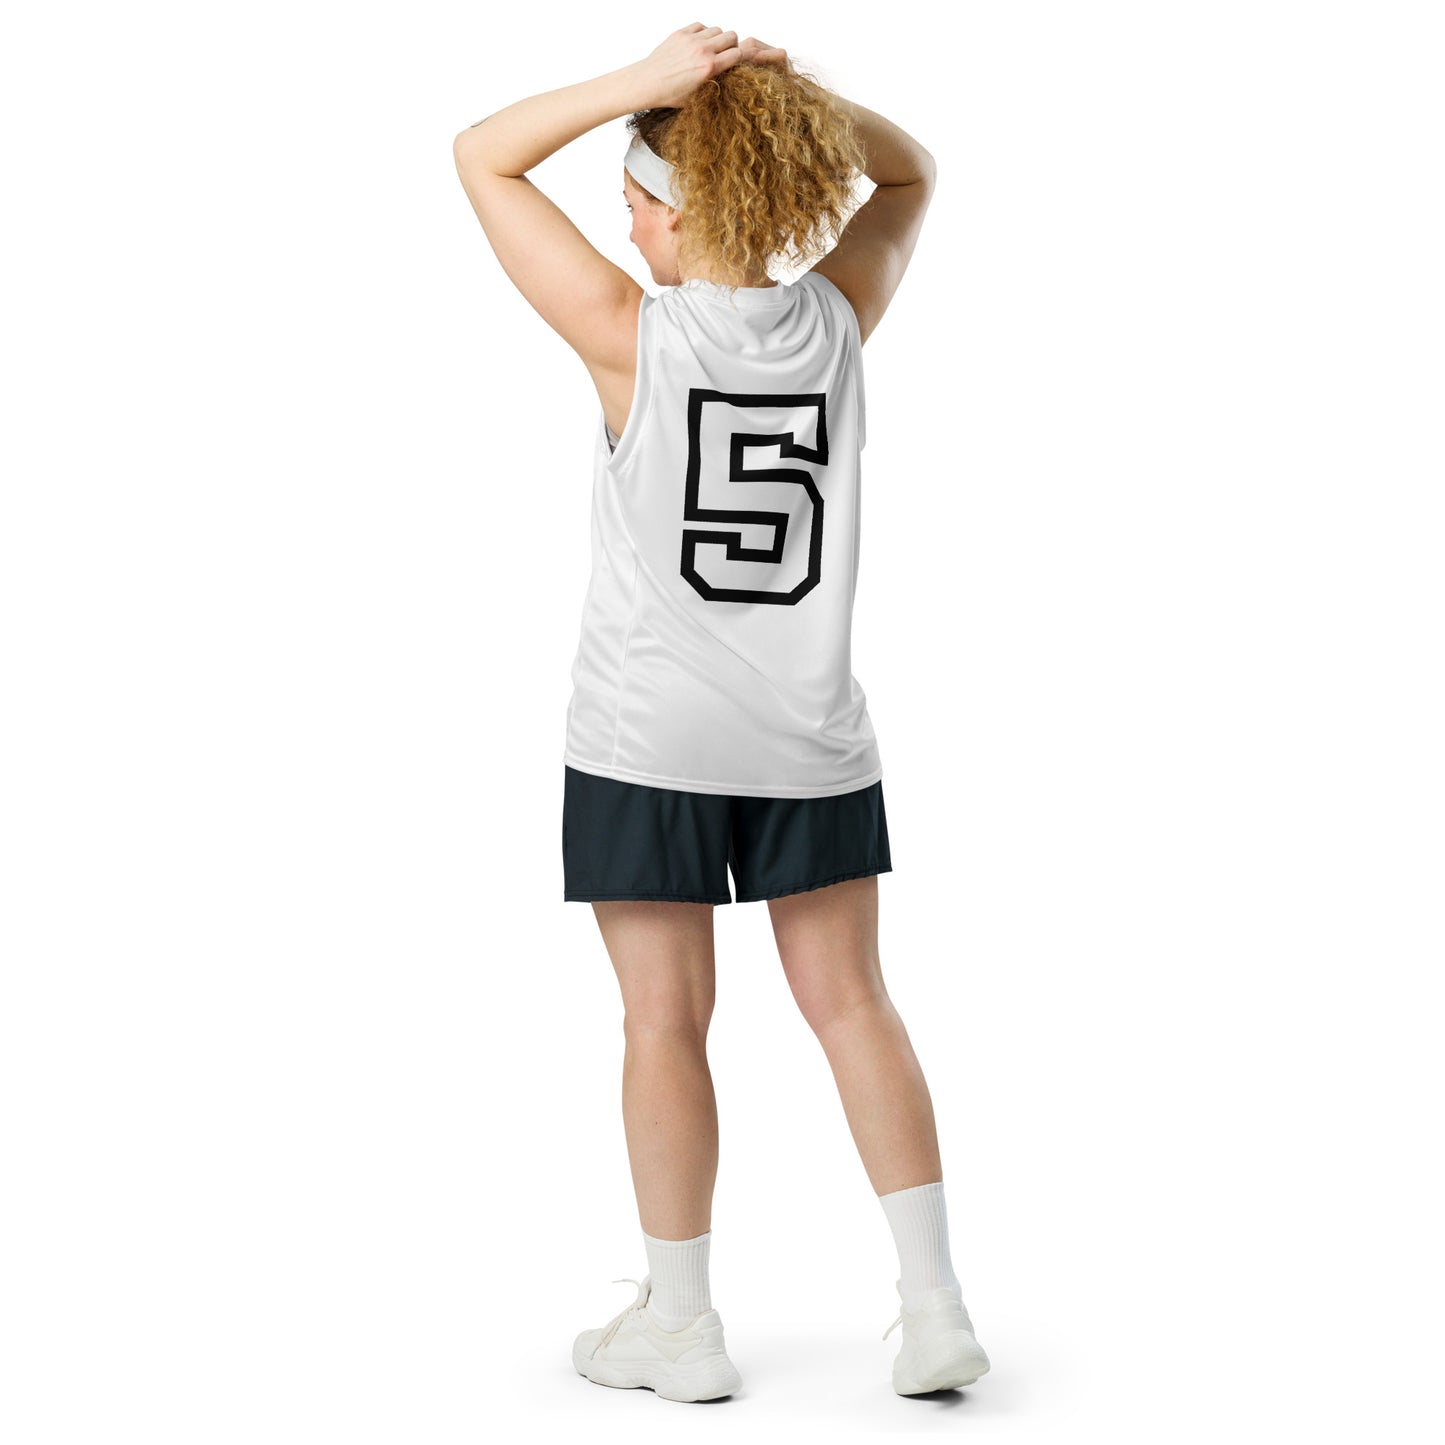 Tribe Influential (v3) Recycled unisex basketball jersey